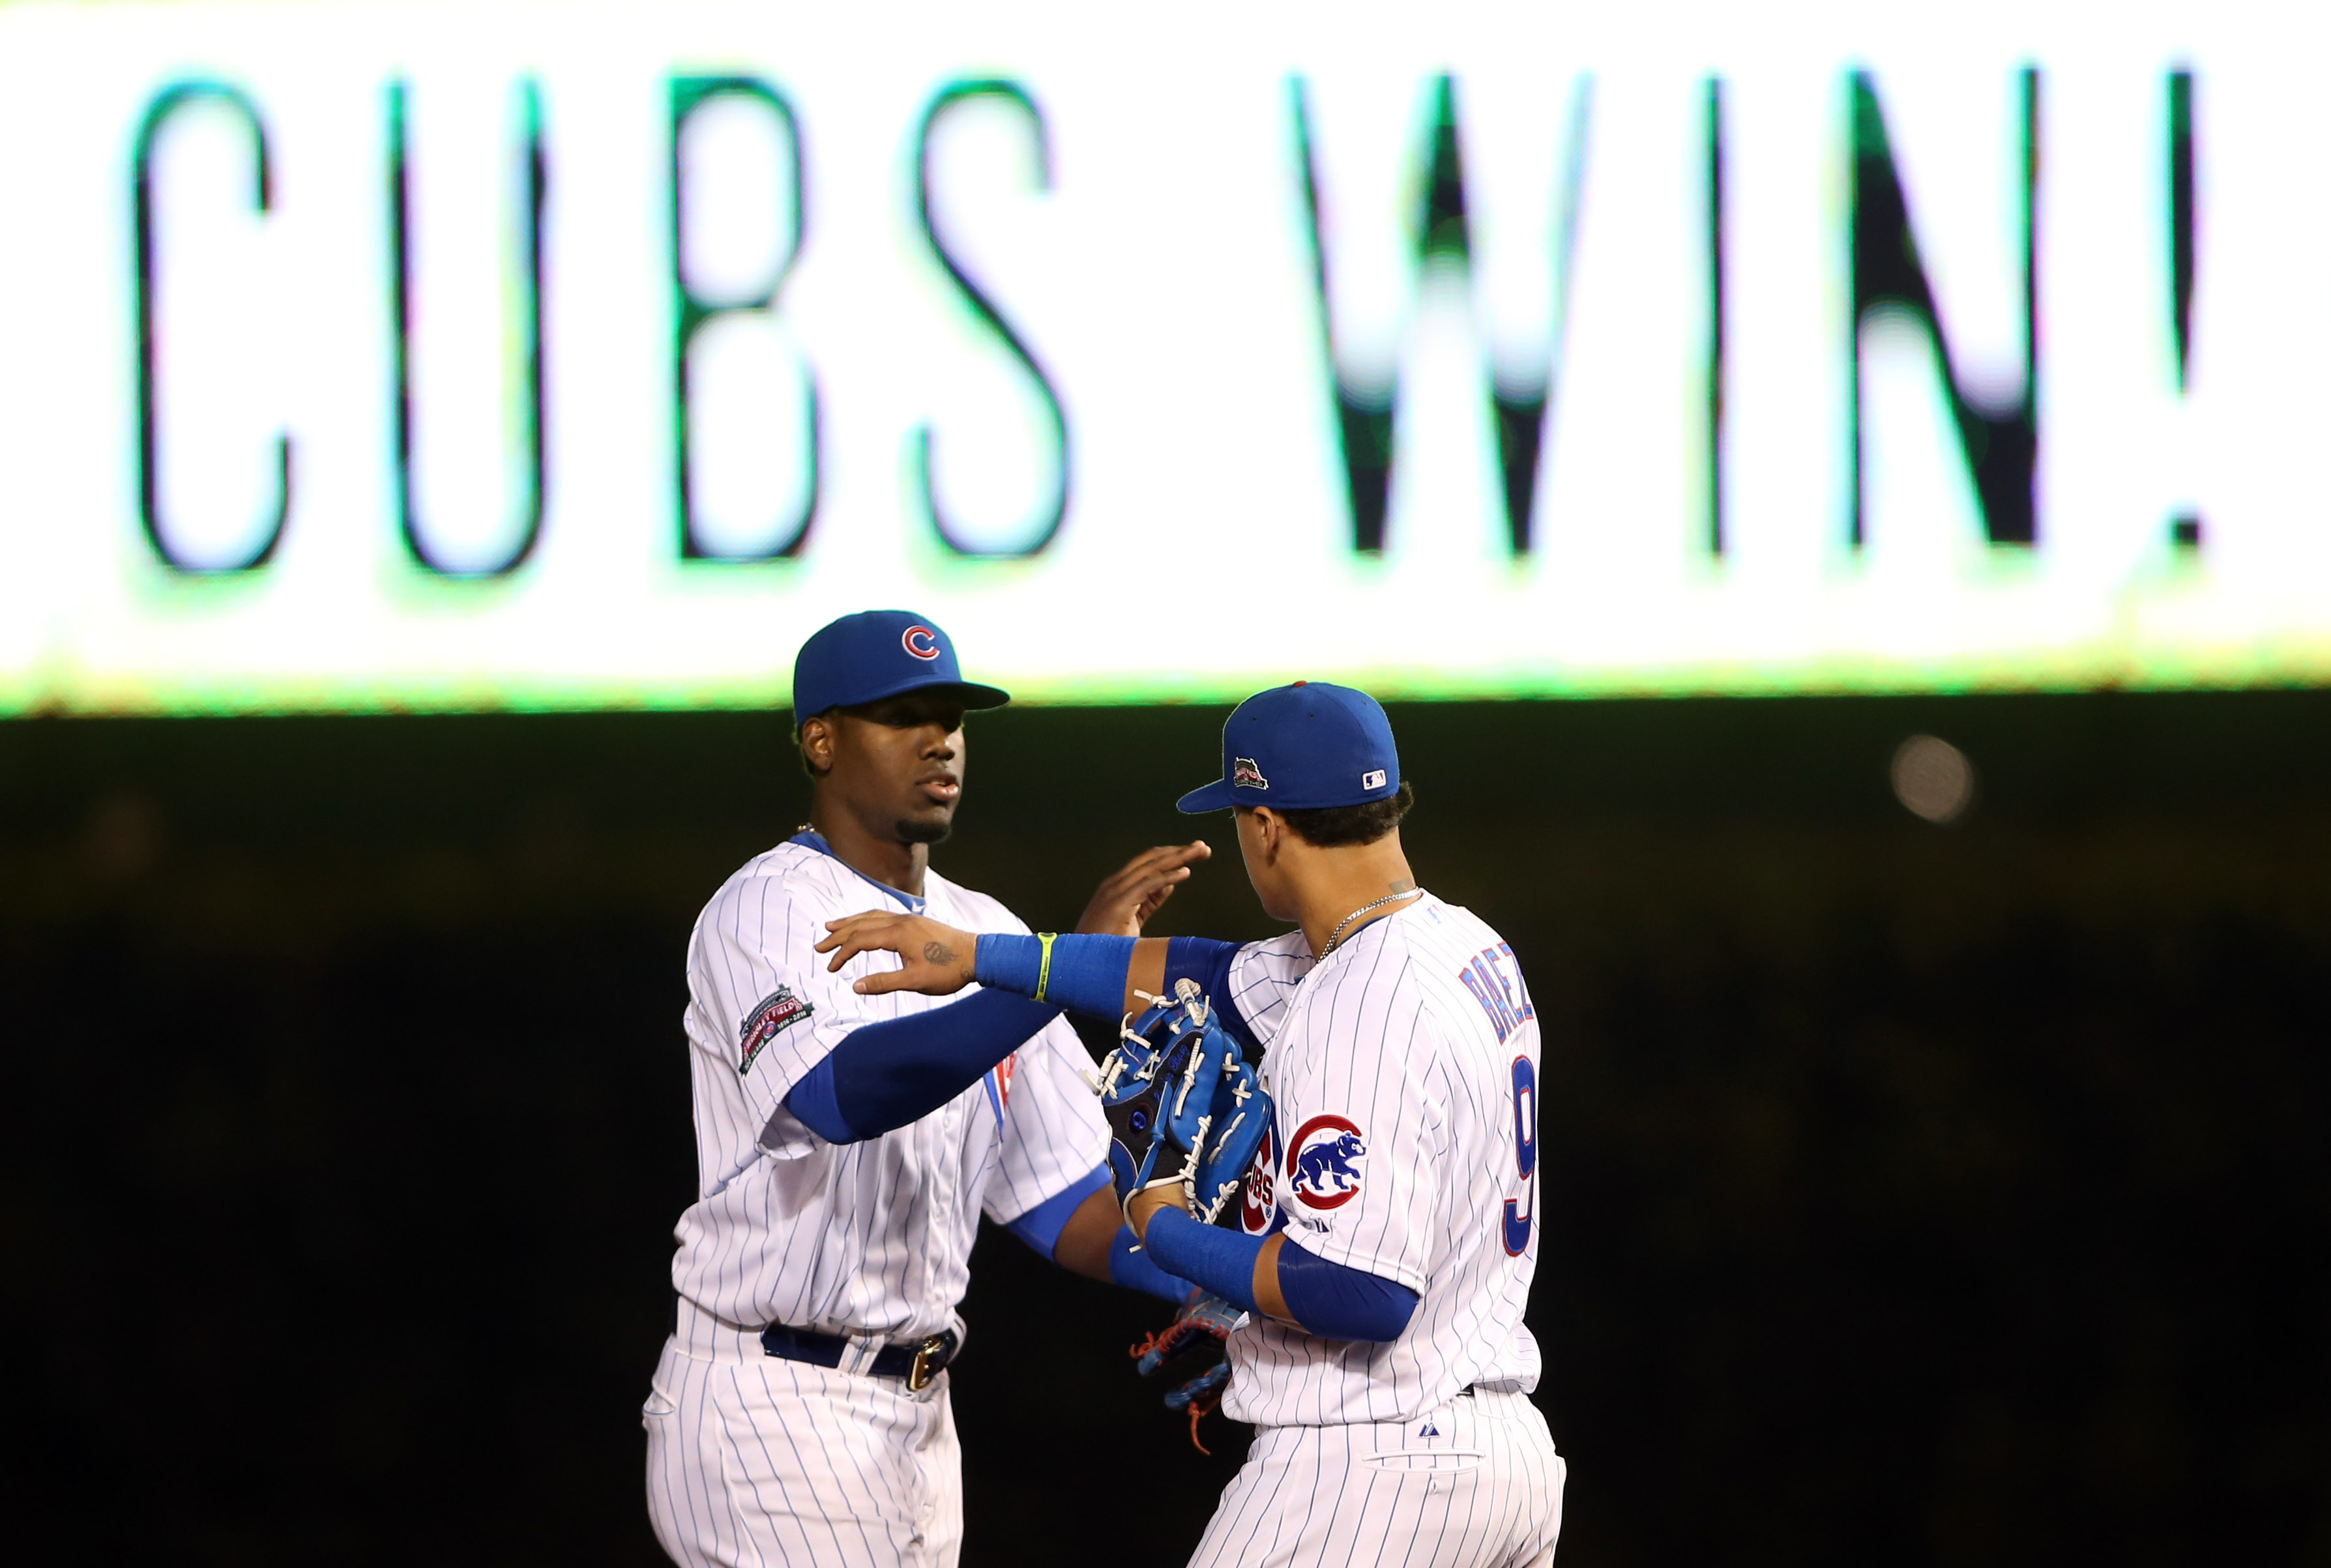 Jorge Soler (left) and Javier Baez celebrate a Cubs win. (USA TODAY Sports)